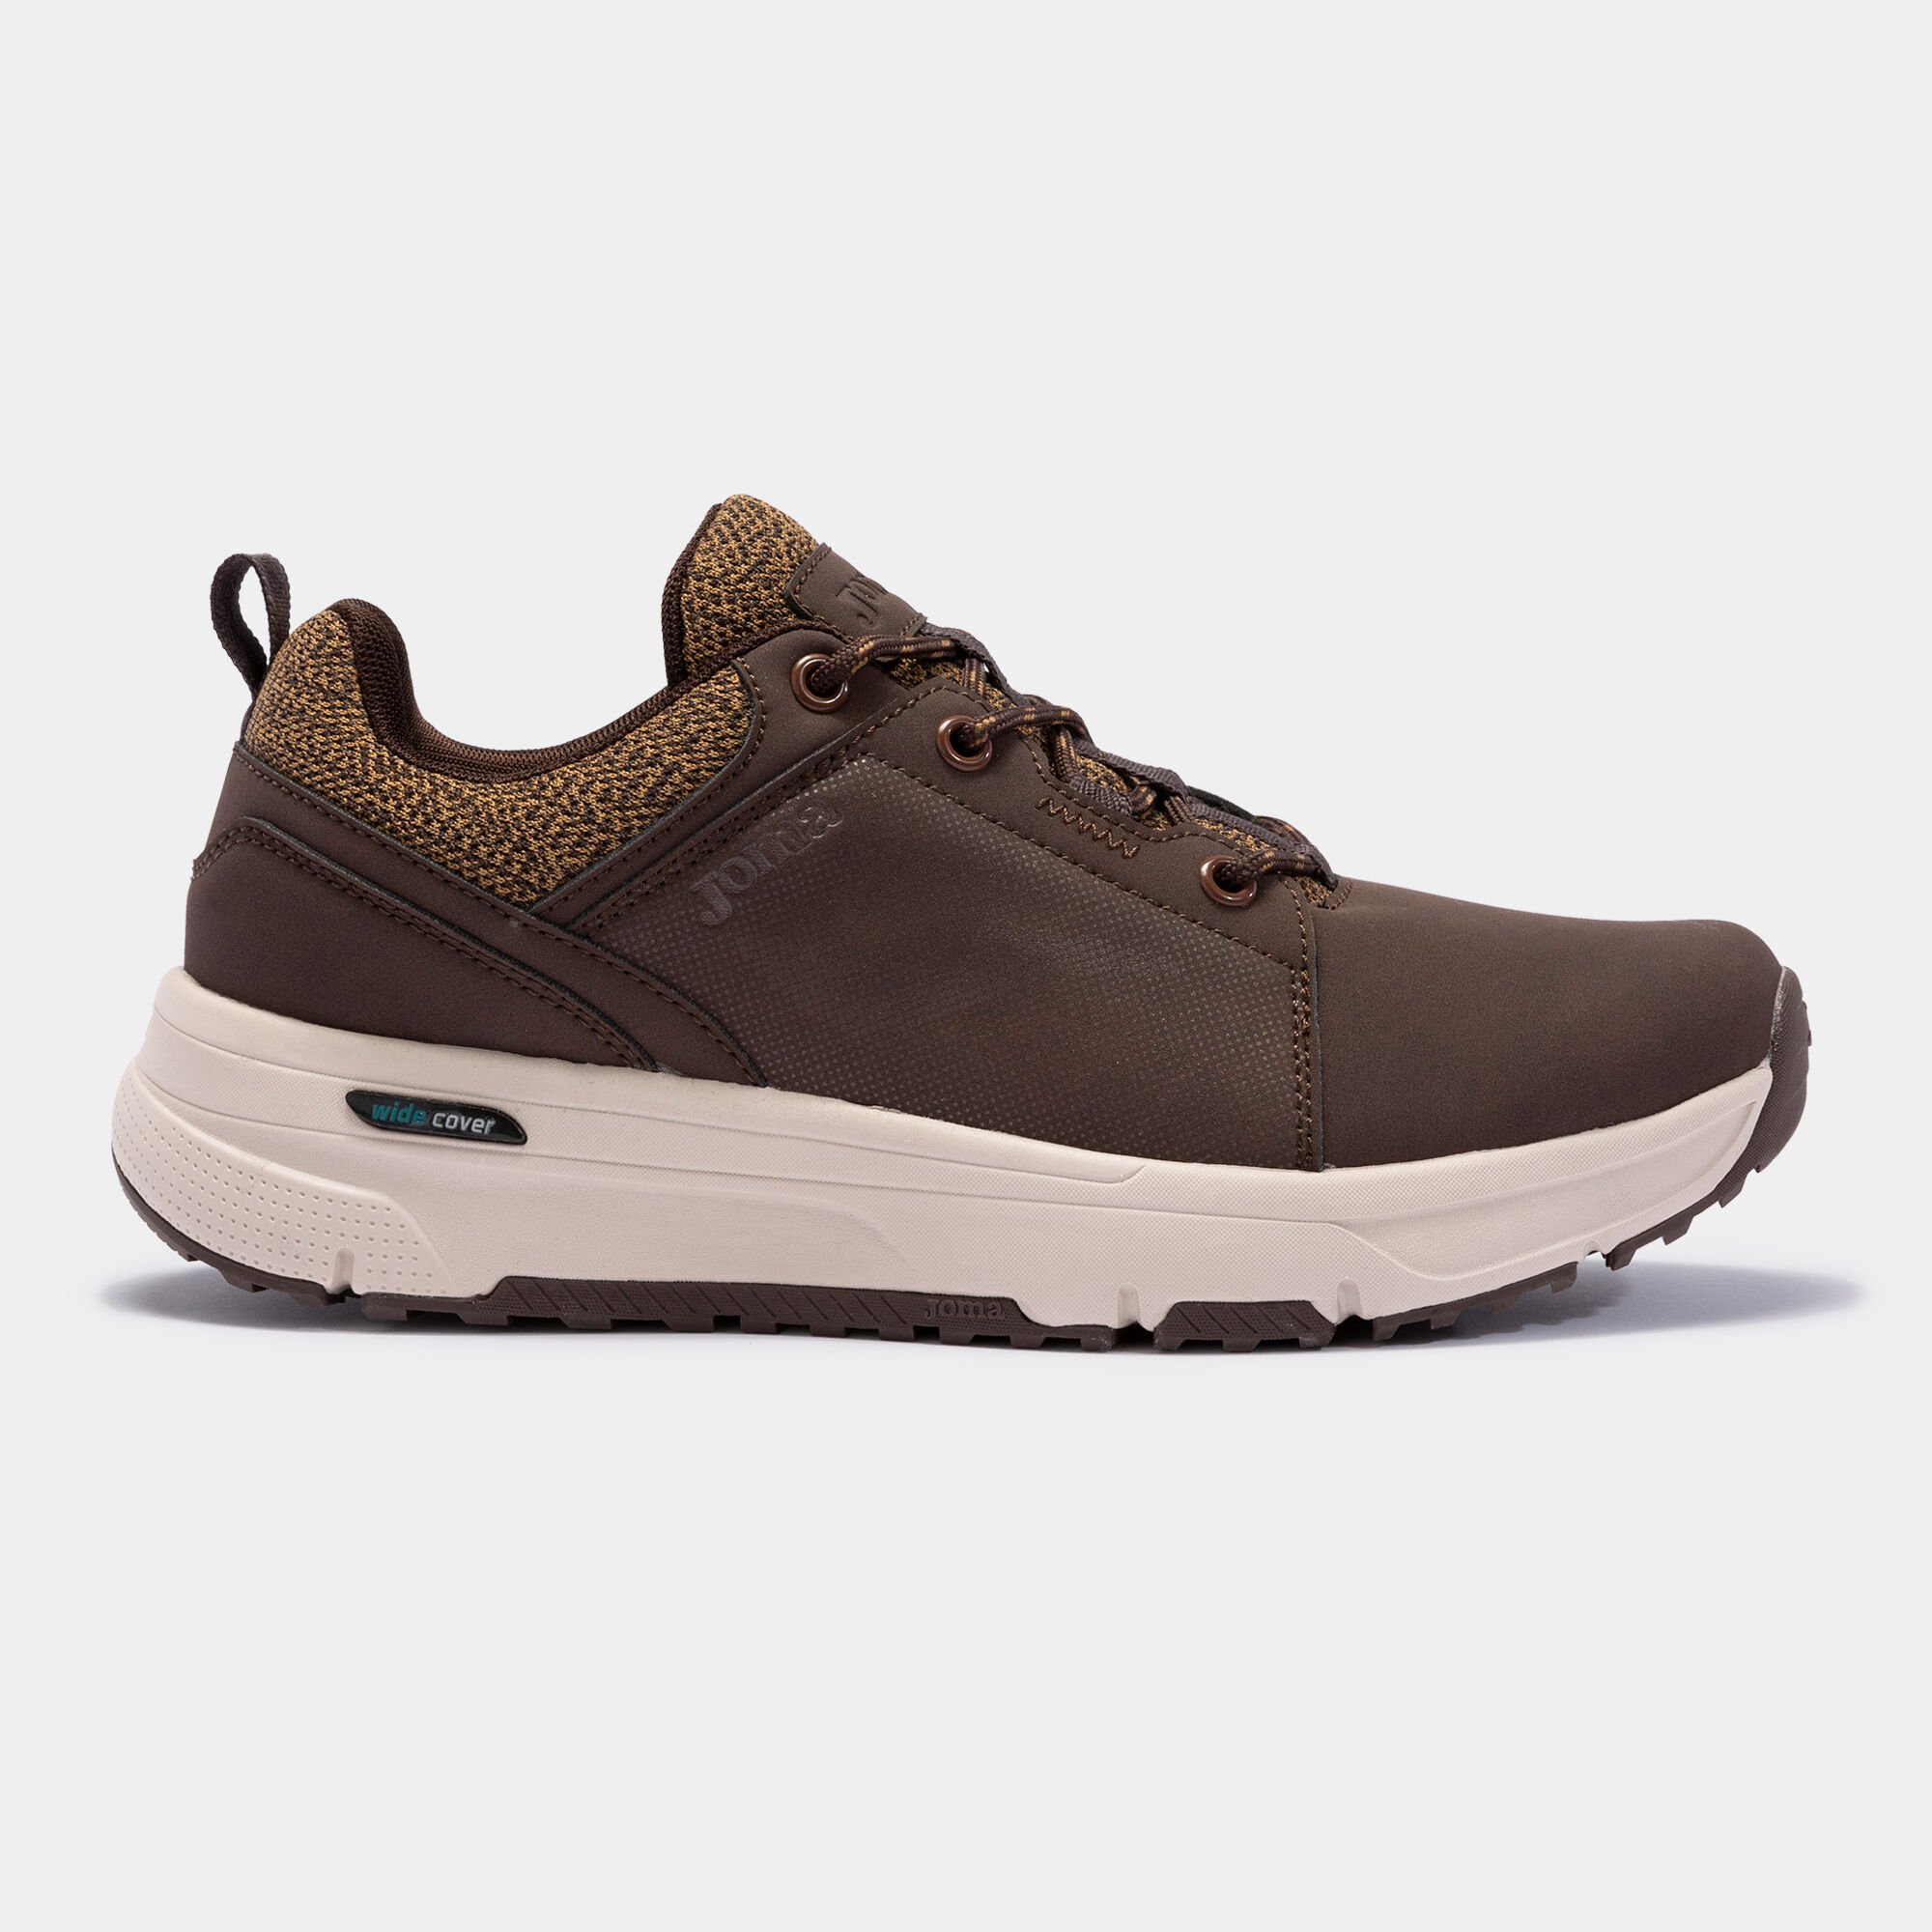 CHAUSSURES CASUAL SANABRIA 22 HOMME MARRON